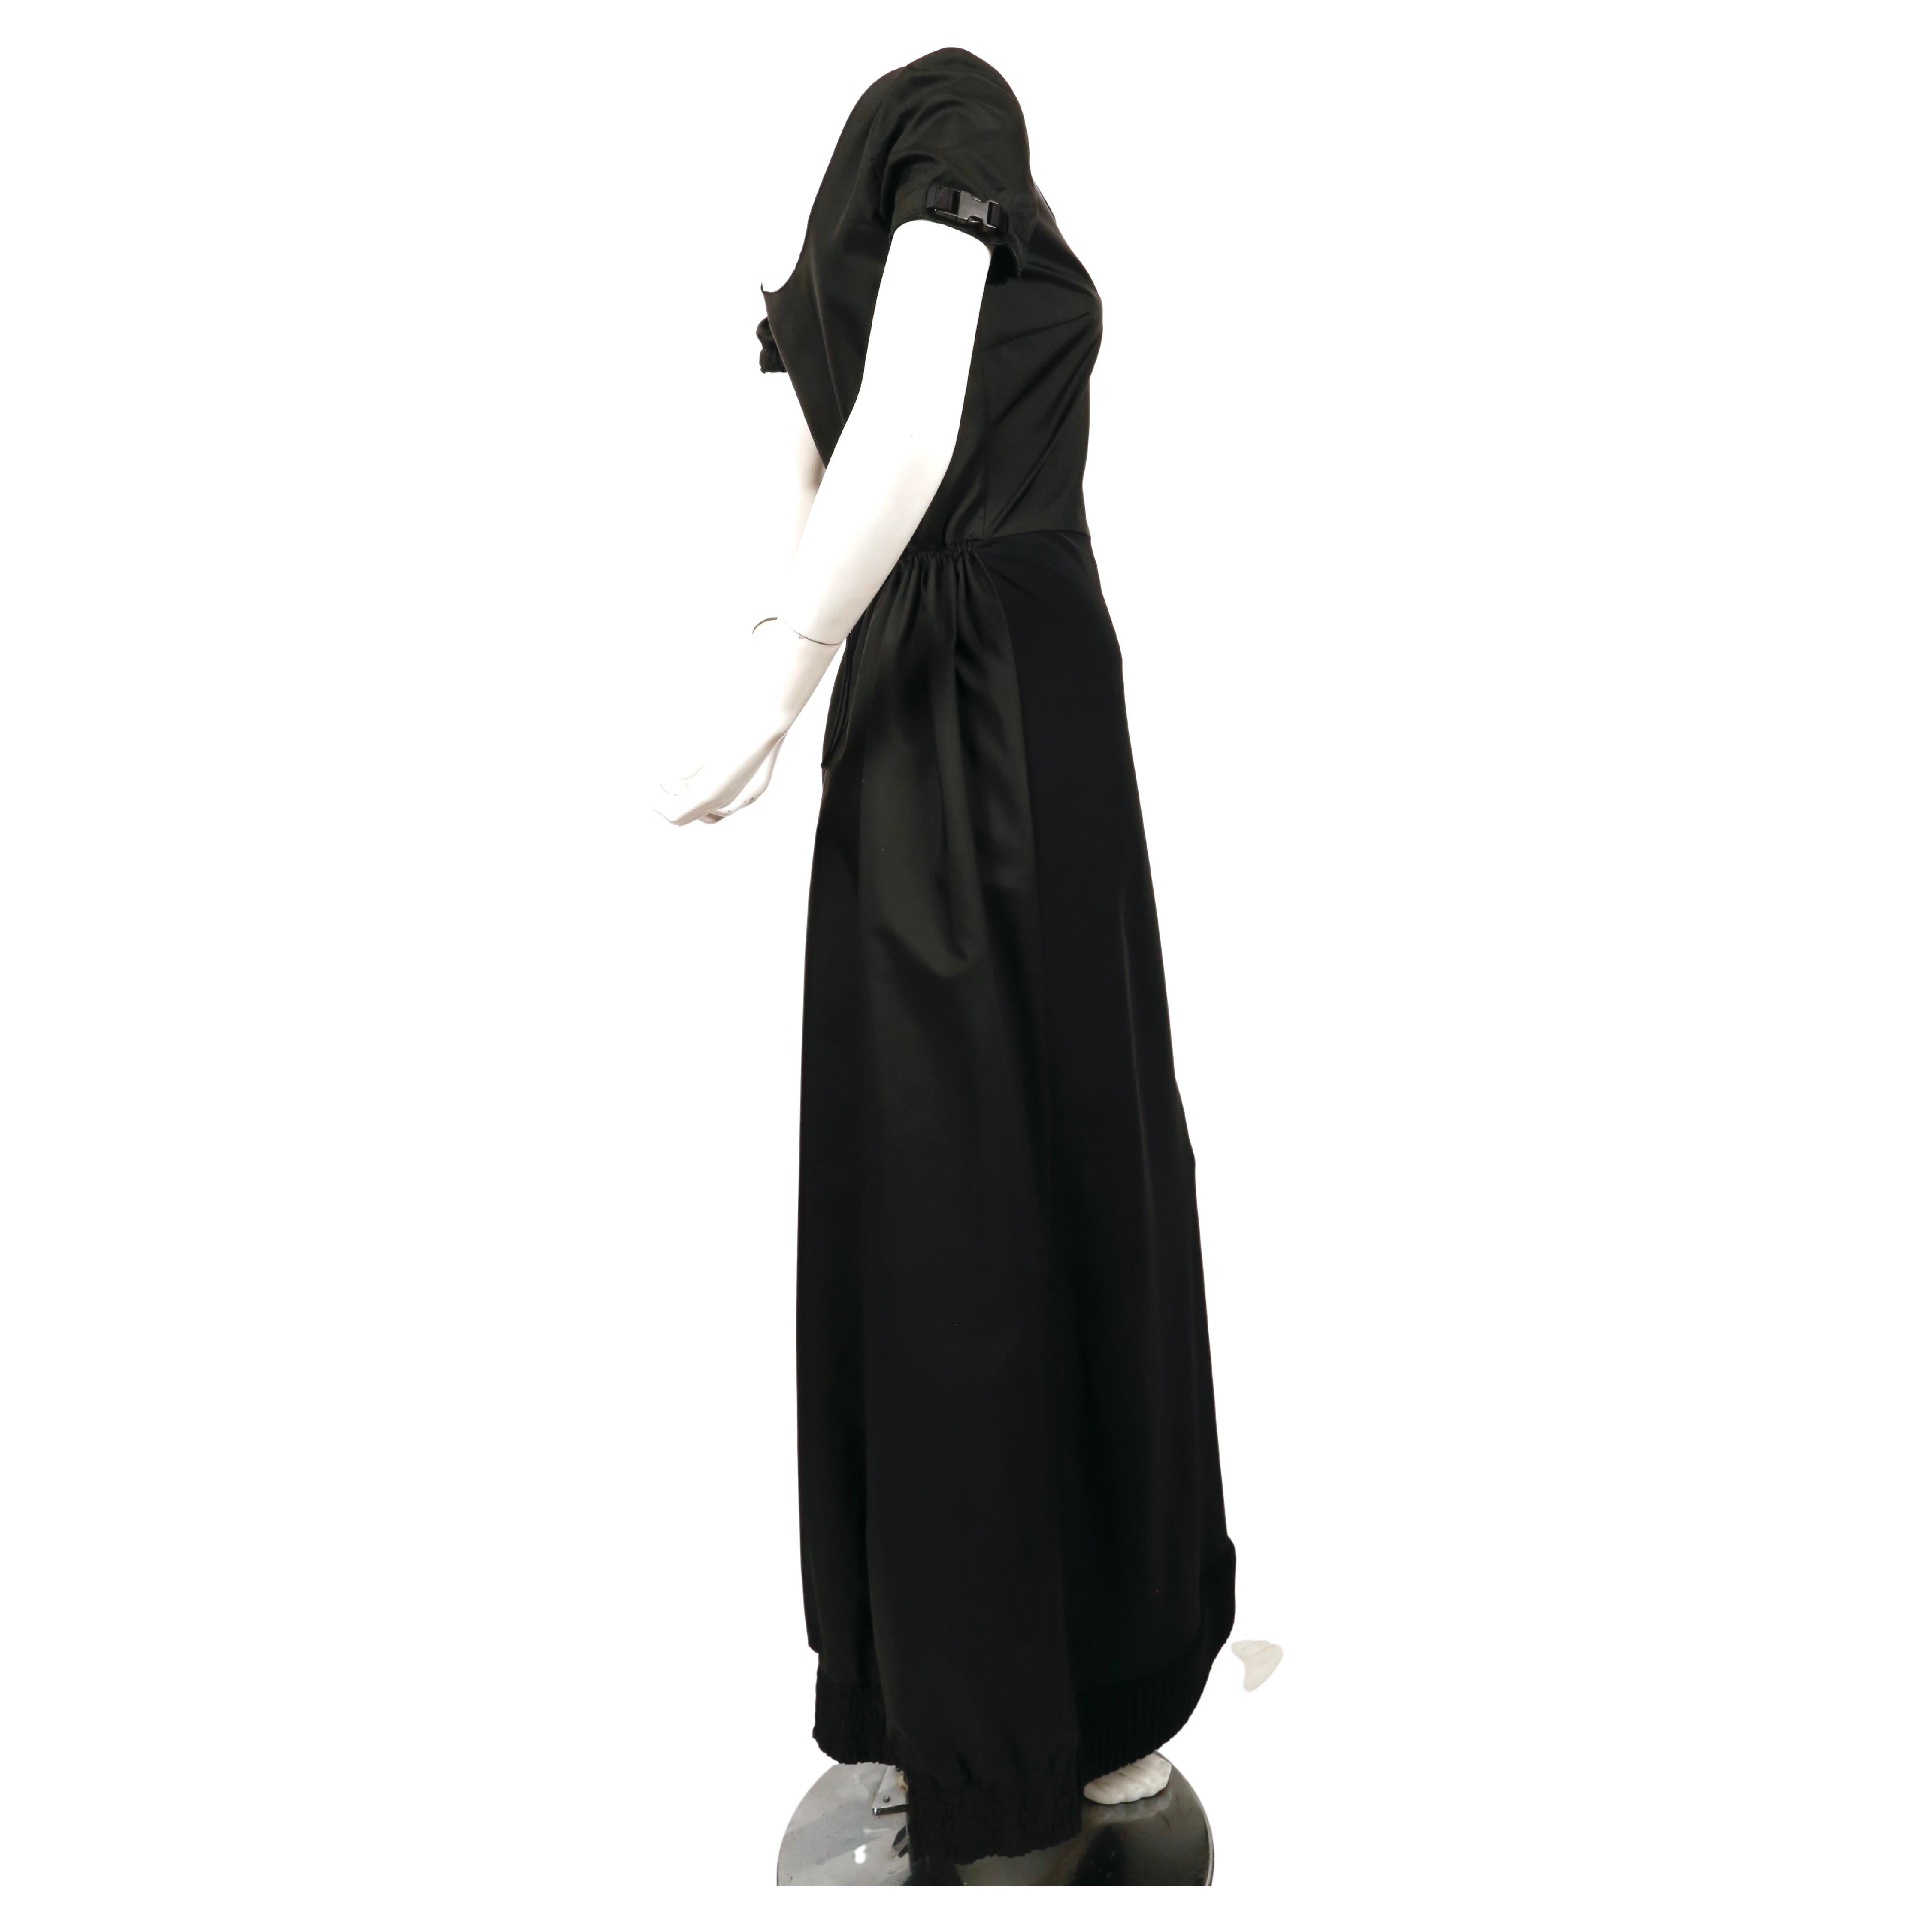 Jet-black, nylon and scuba gown with ribbed knit hemline, buckle details at sleeves and cinched waist designed by Miuccia Prada exactly as seen on the MIU MIU runway for fall of 1999. Labeled a size 42 however this fits small and would best fit a US